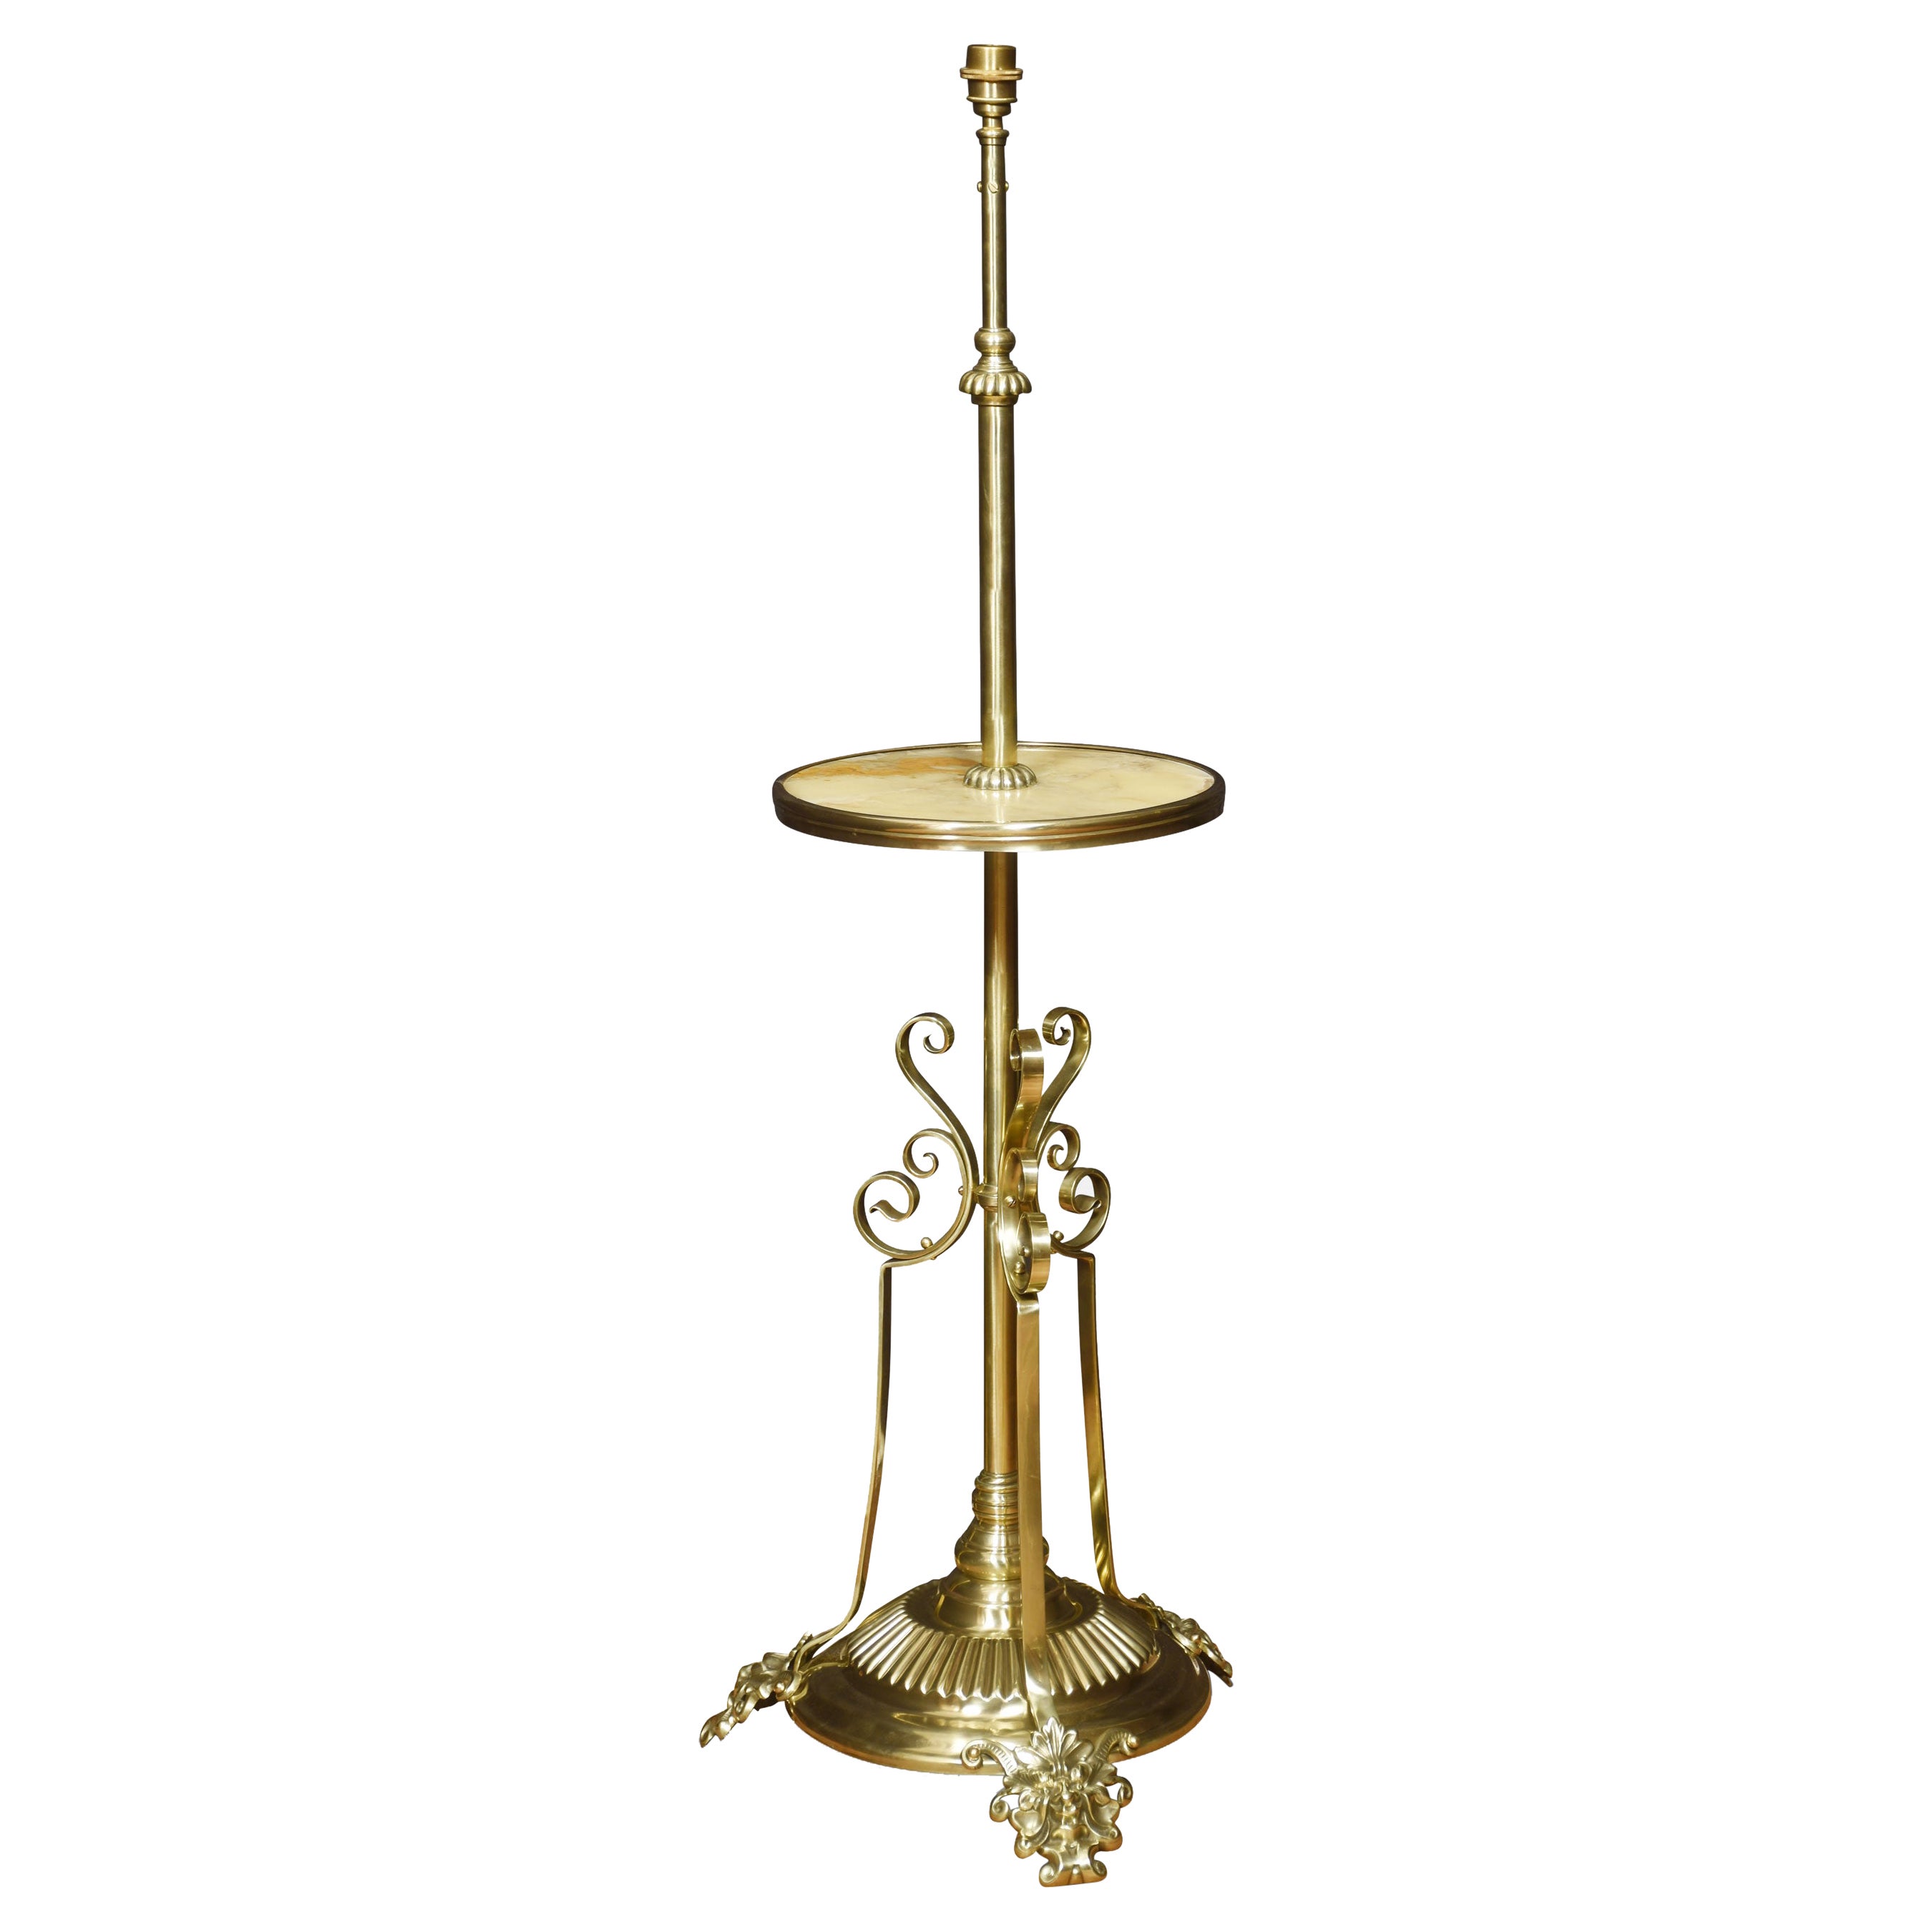 Onyx and Brass Adjustable Standard Lamp